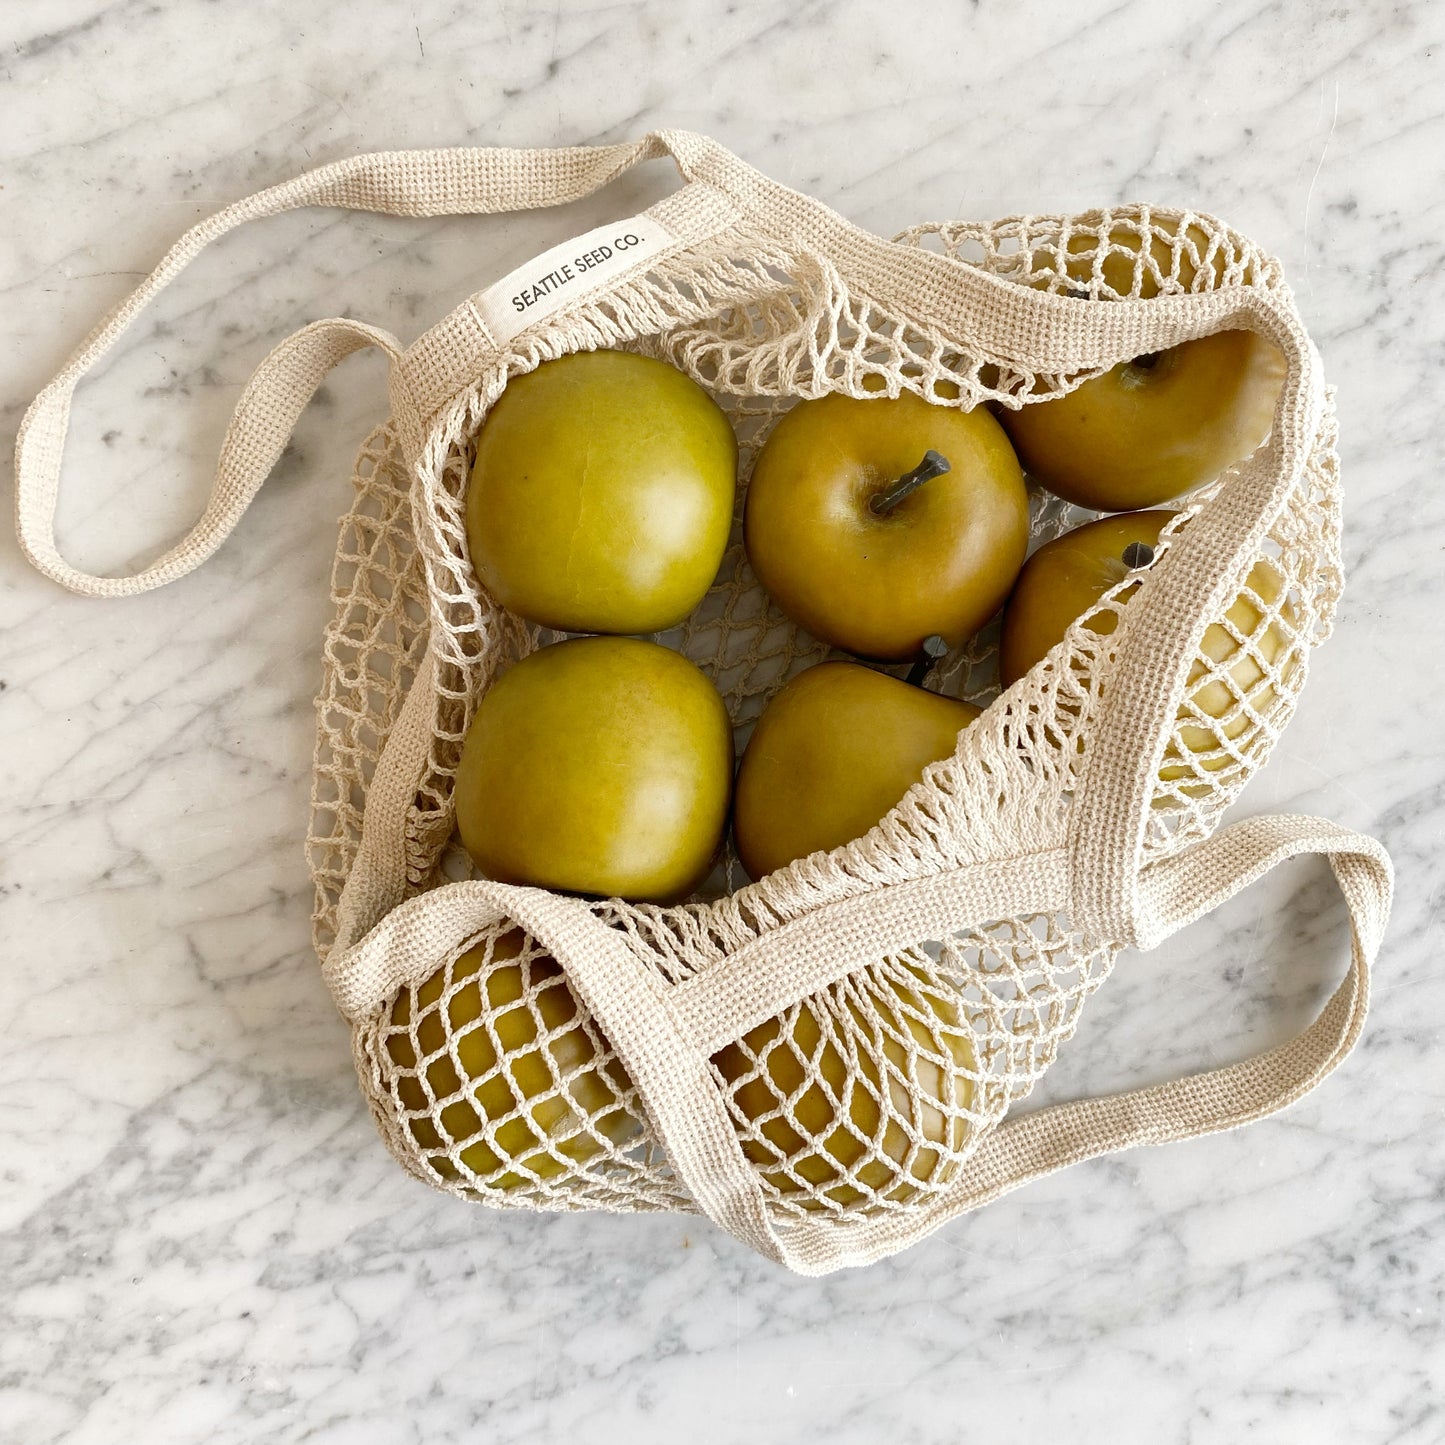 French Market Tote, Natural